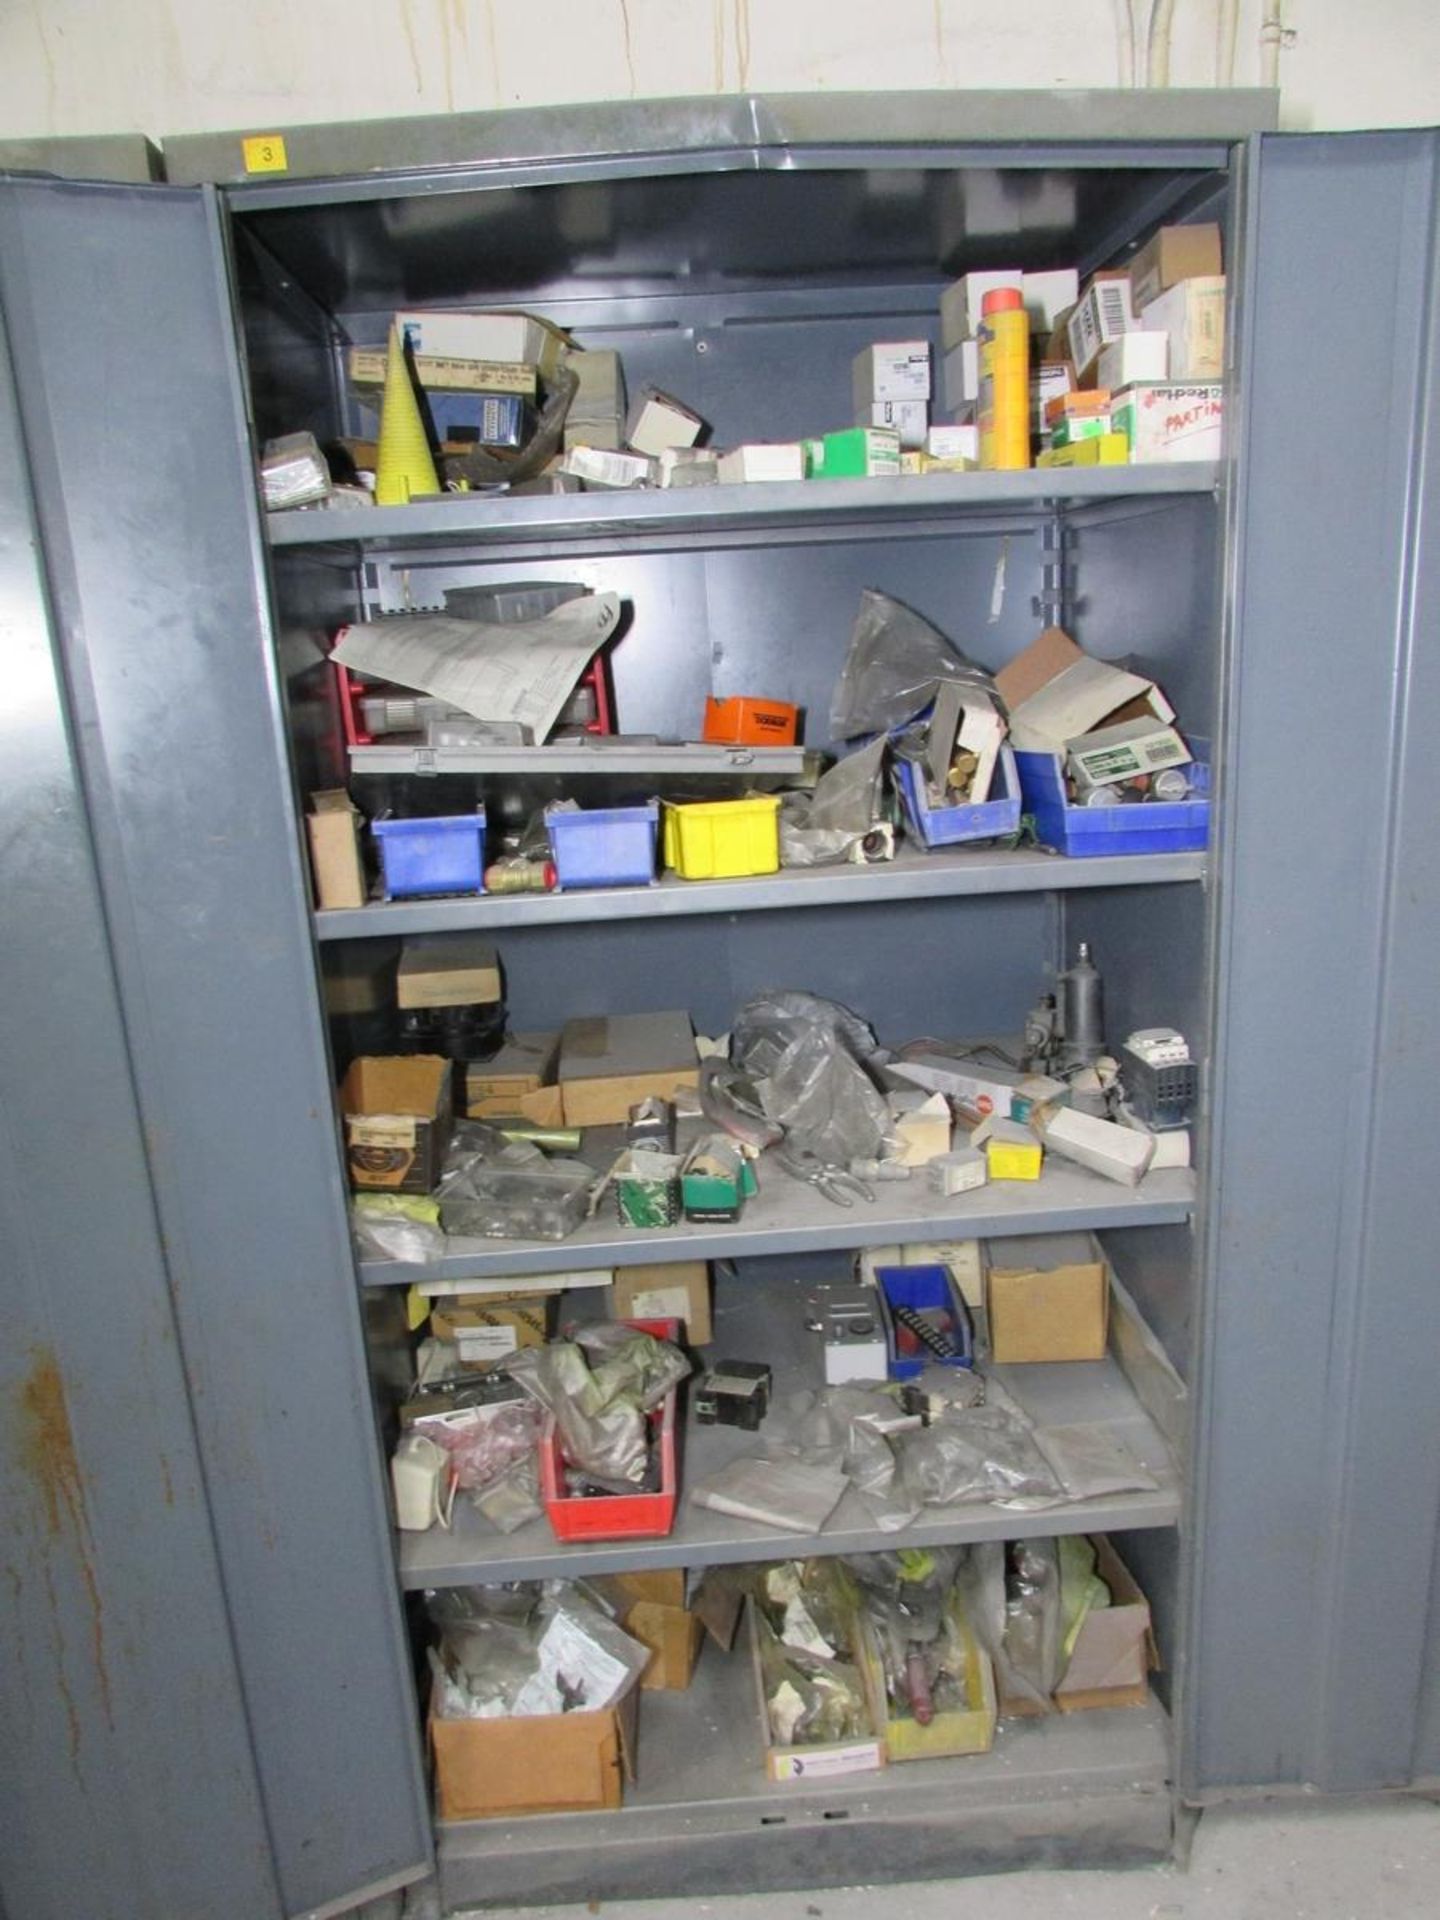 LOT - (3) 2-DOOR CABINETS, W/ CONTENTS: ASSORTED PARTS, FUSES, HARDWARE, ETC. - Image 8 of 10